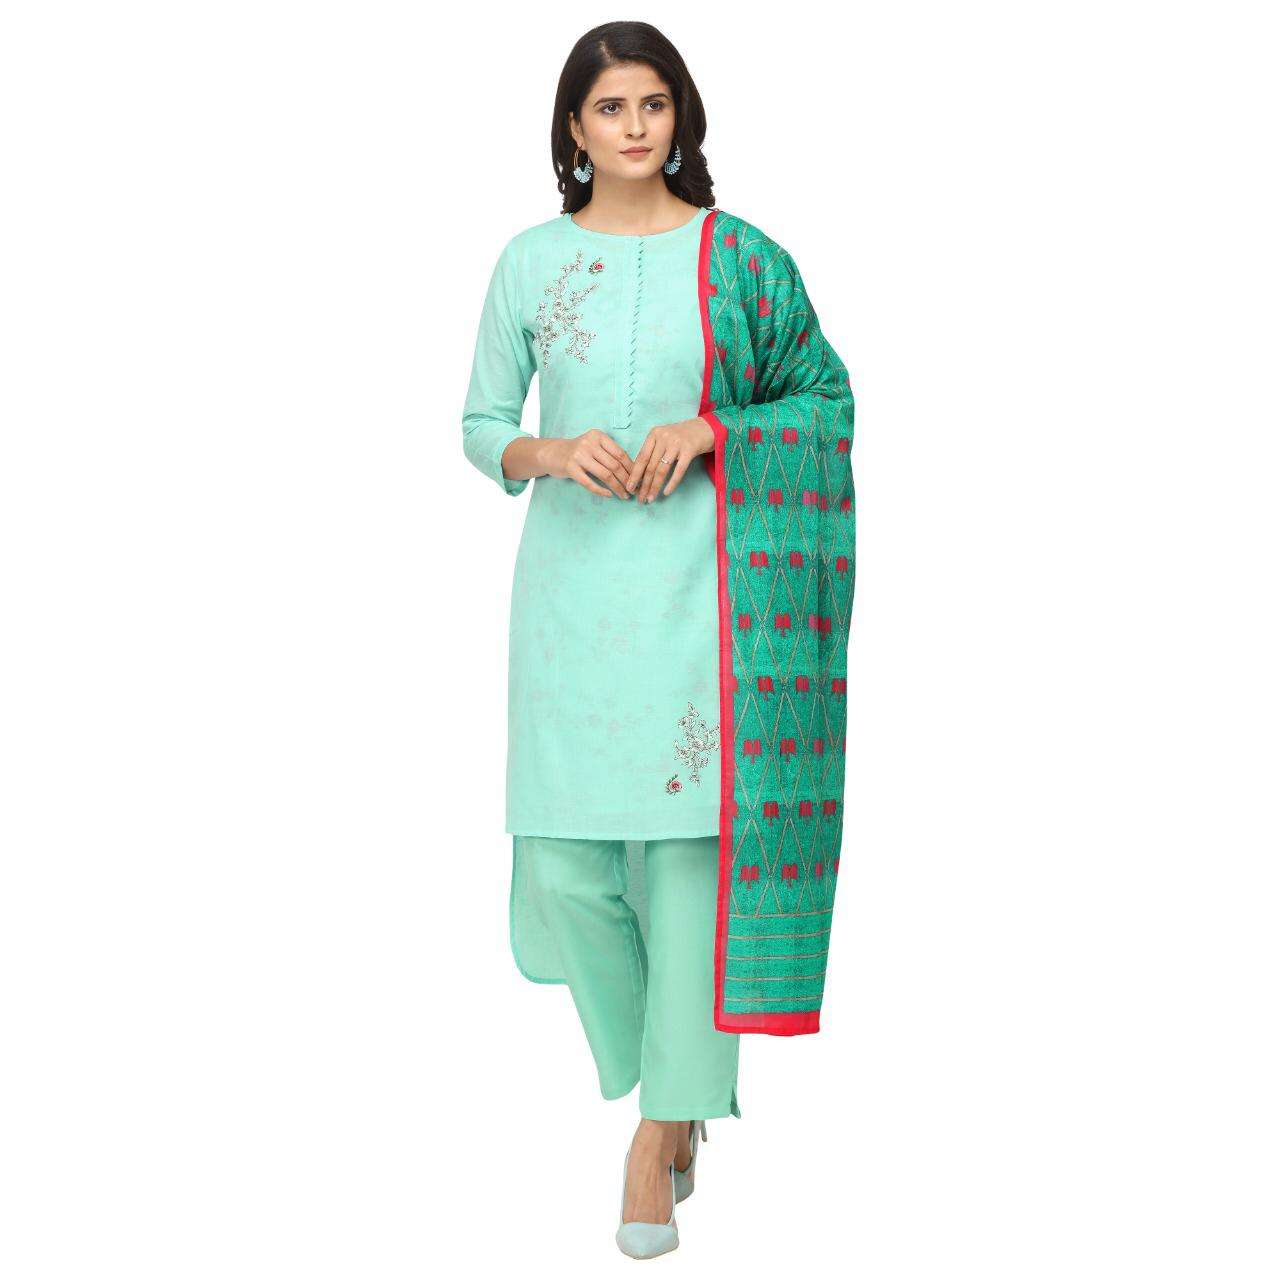 Jansi Present Saanjh 51-58 Series Linen Cotton With Embroidery Top With Bottom